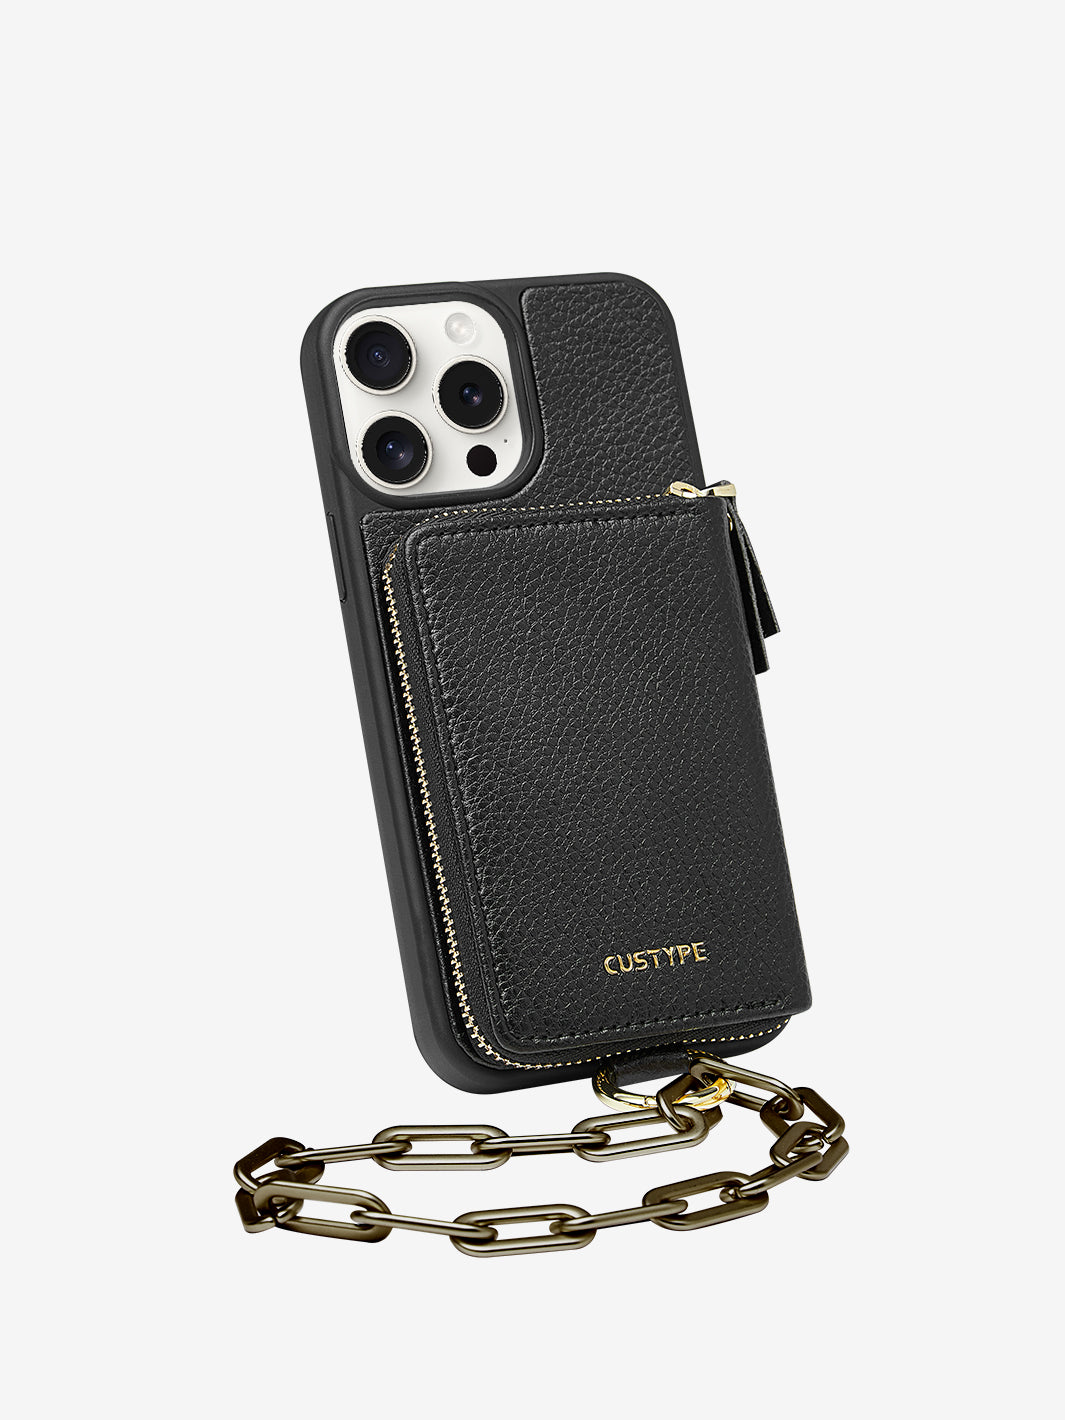 Custype Wallet iPhone Case with Wristband in Black